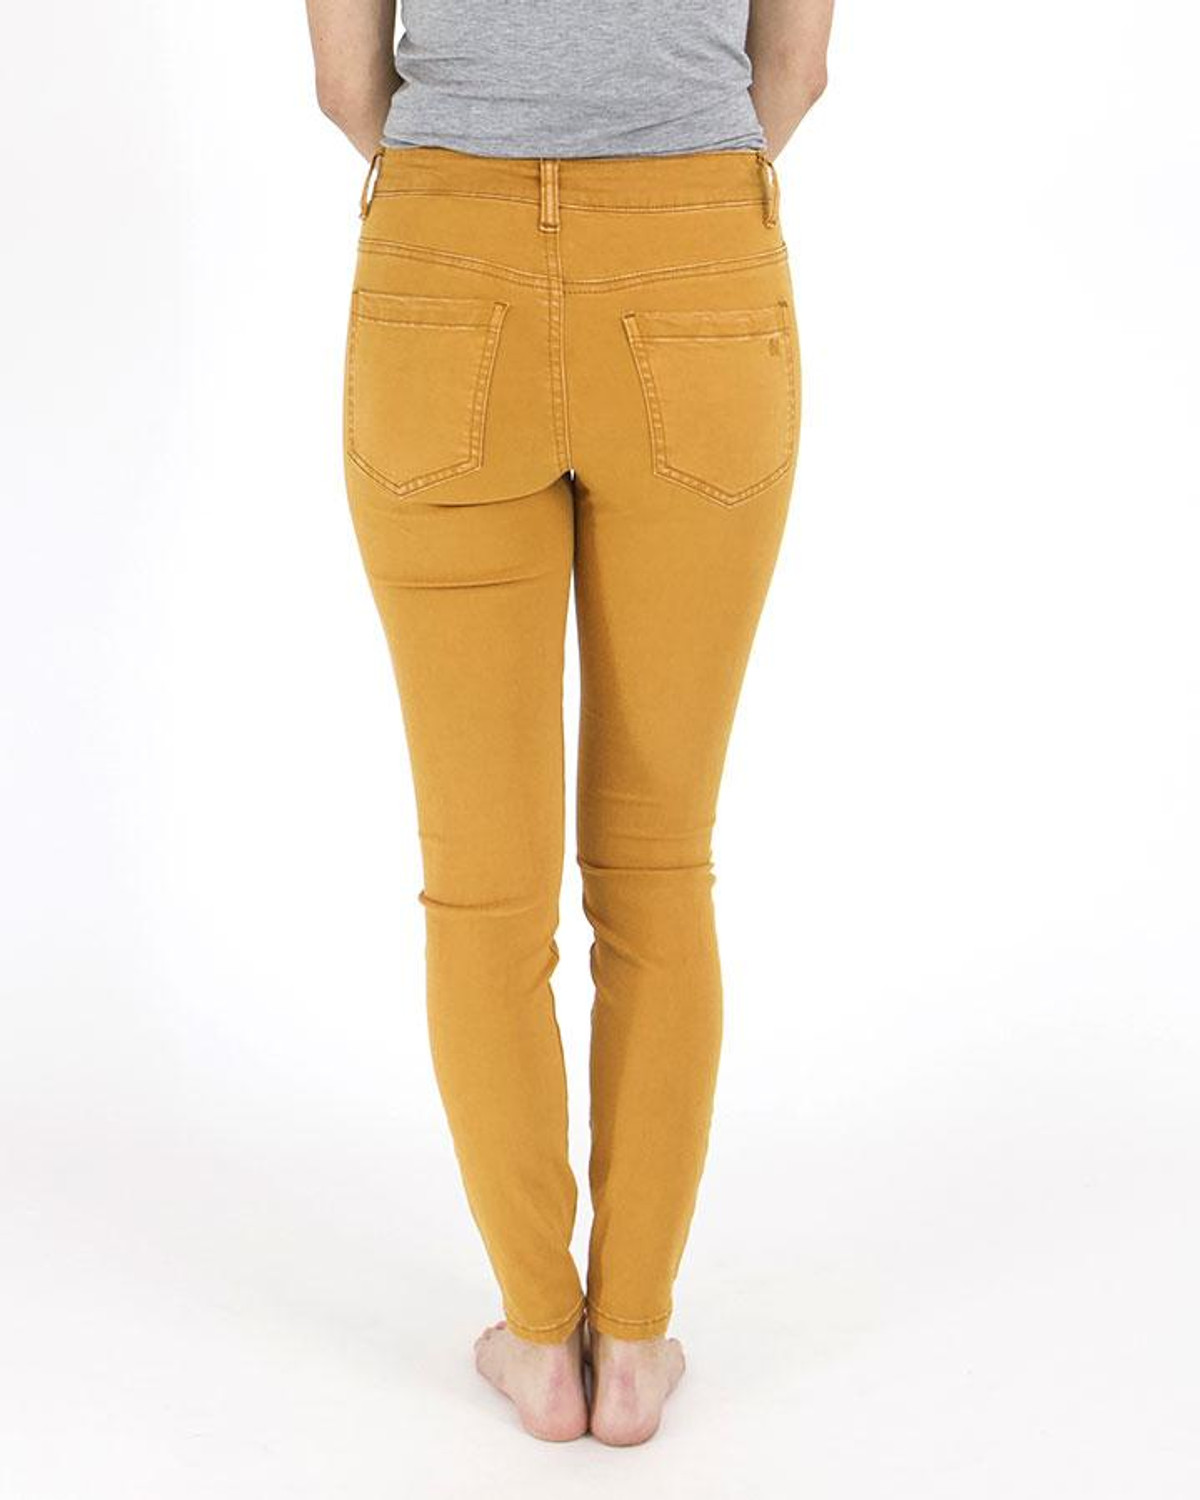 Grace and Lace Colored Jeggings - Mustard